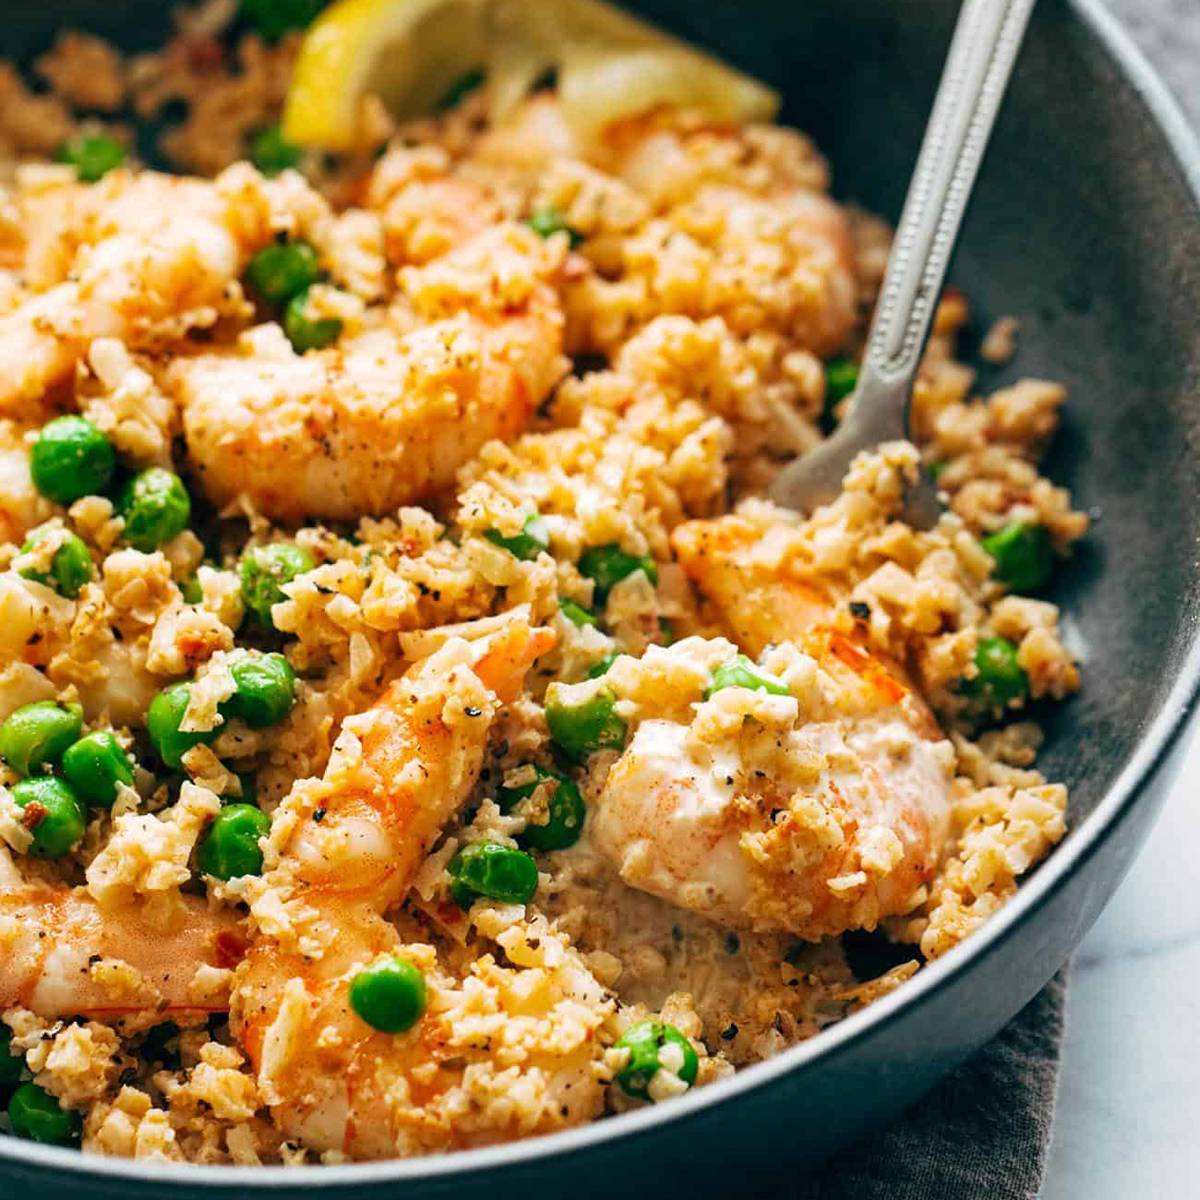 Shrimp, cauliflower rice, and peas in a bowl with a fork